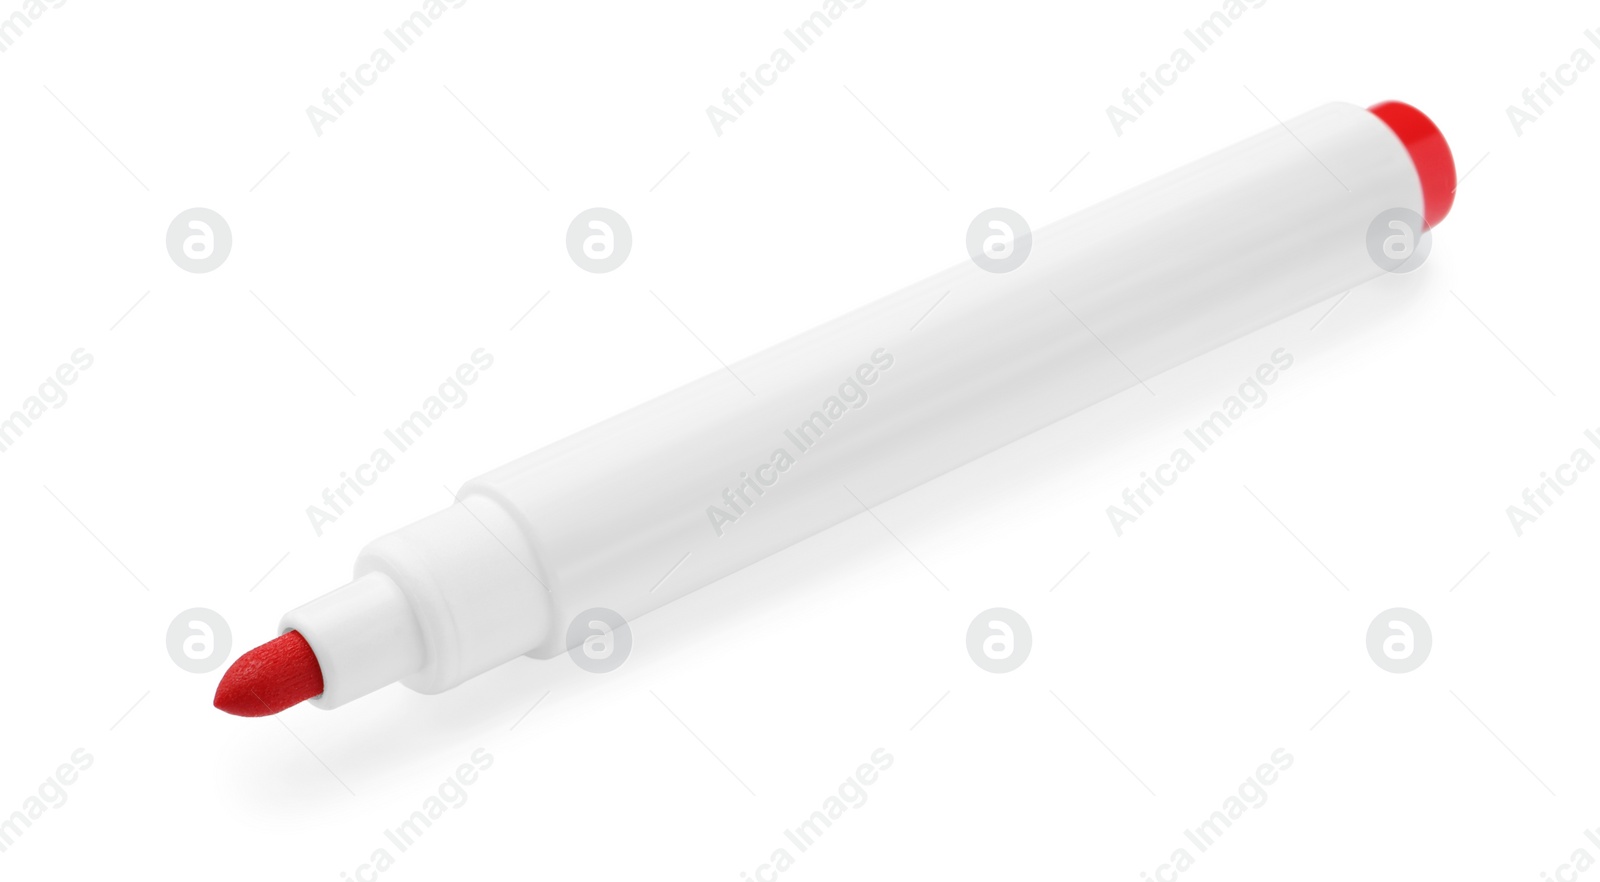 Photo of Bright red marker isolated on white. School stationery